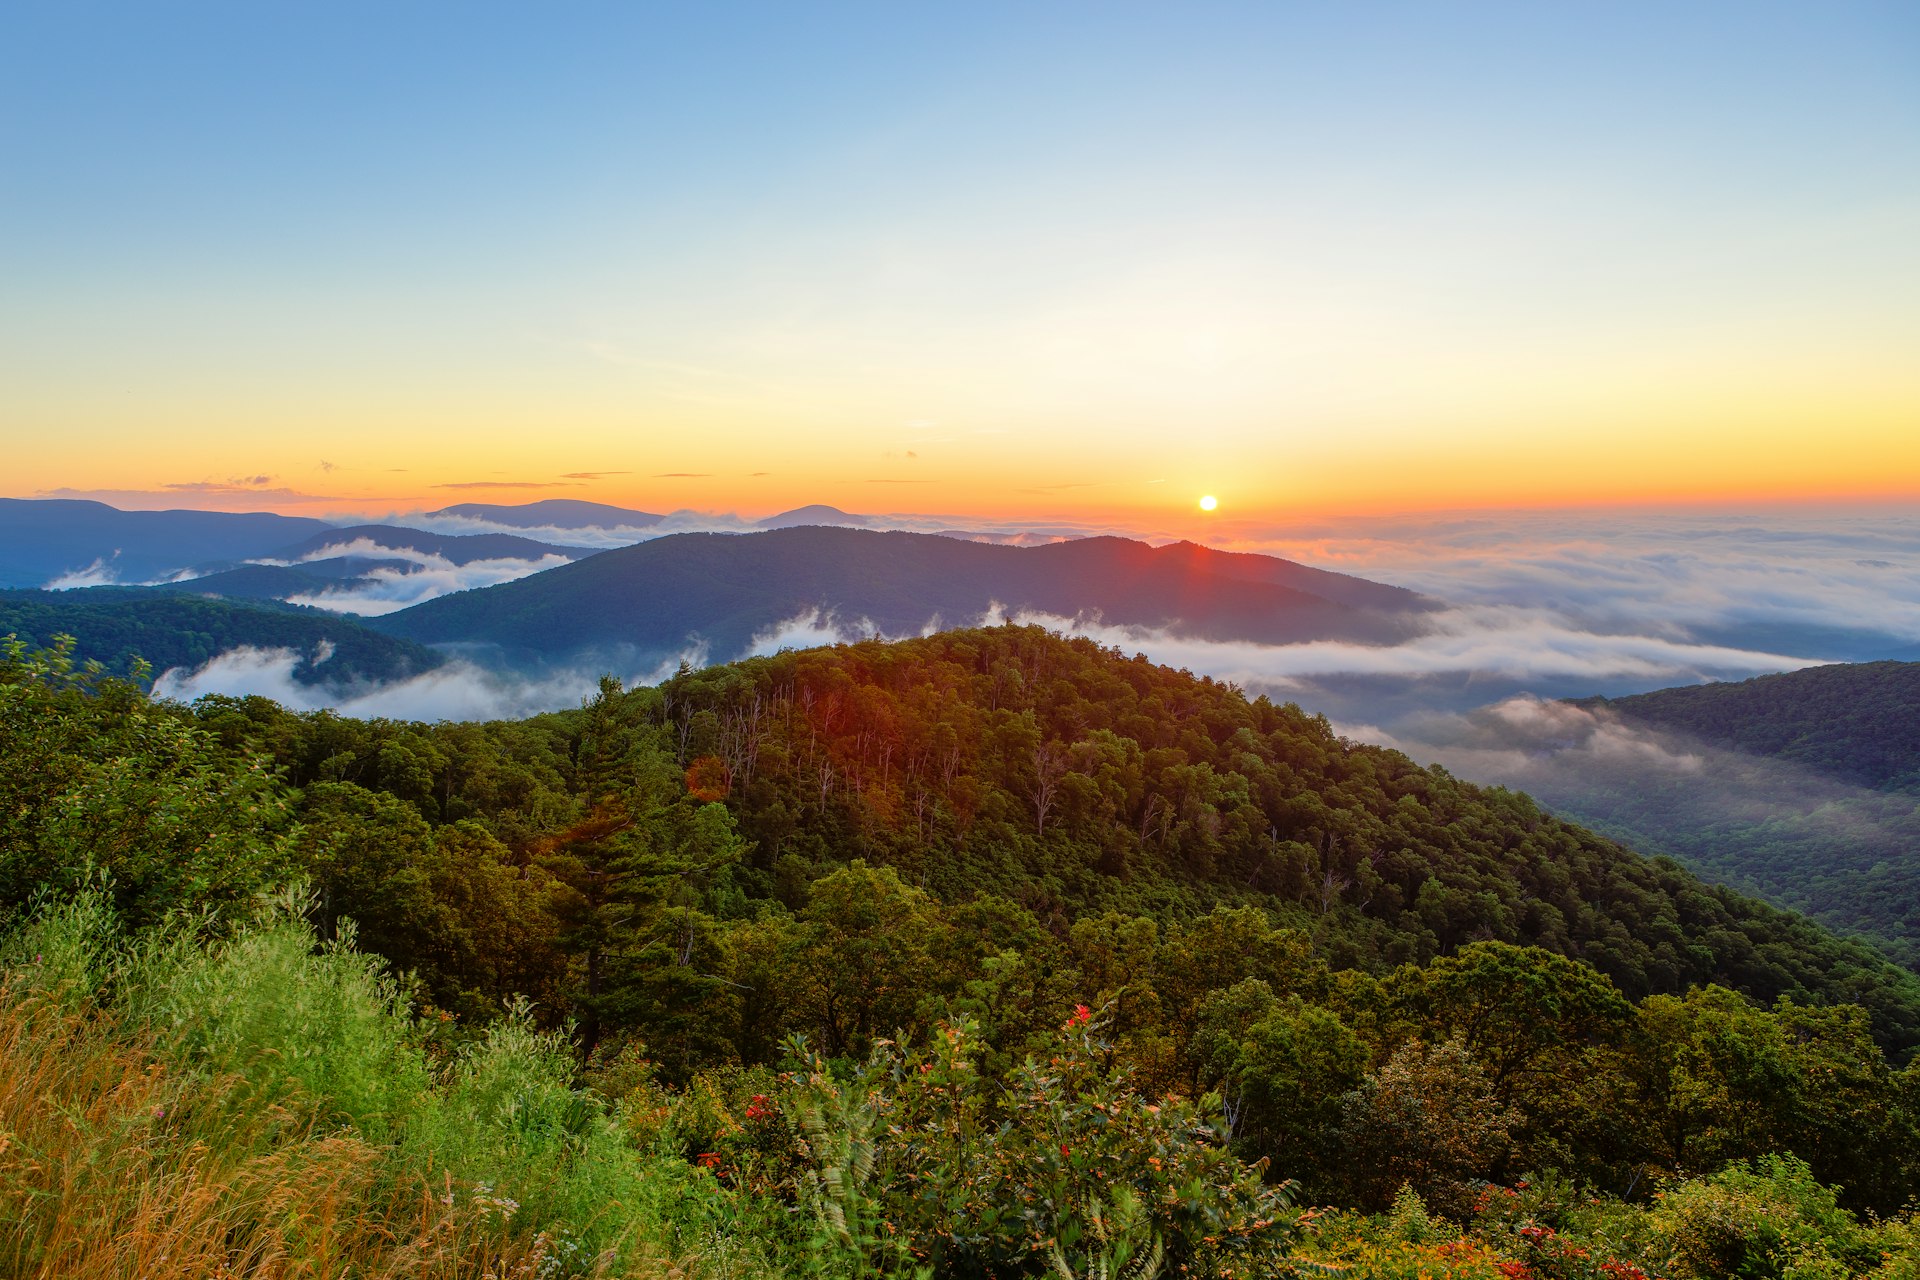 The sun rises over vast hilly landscape, with some cloud covering the valleys below